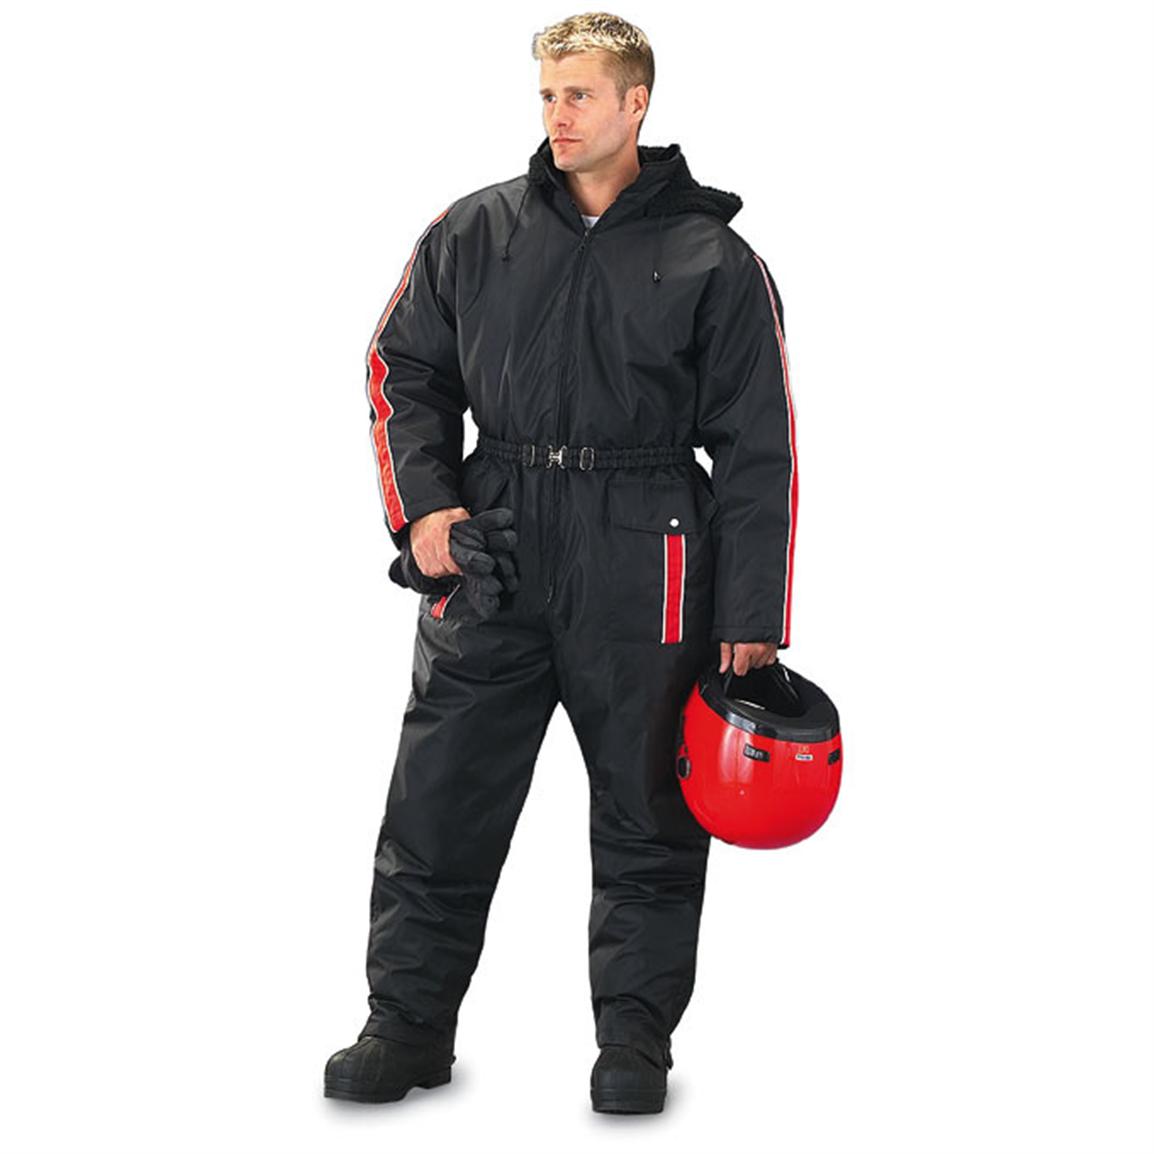 Guide Gear® 1-piece Snowsuit, Black / Red - 56636, Overalls & Coveralls ...